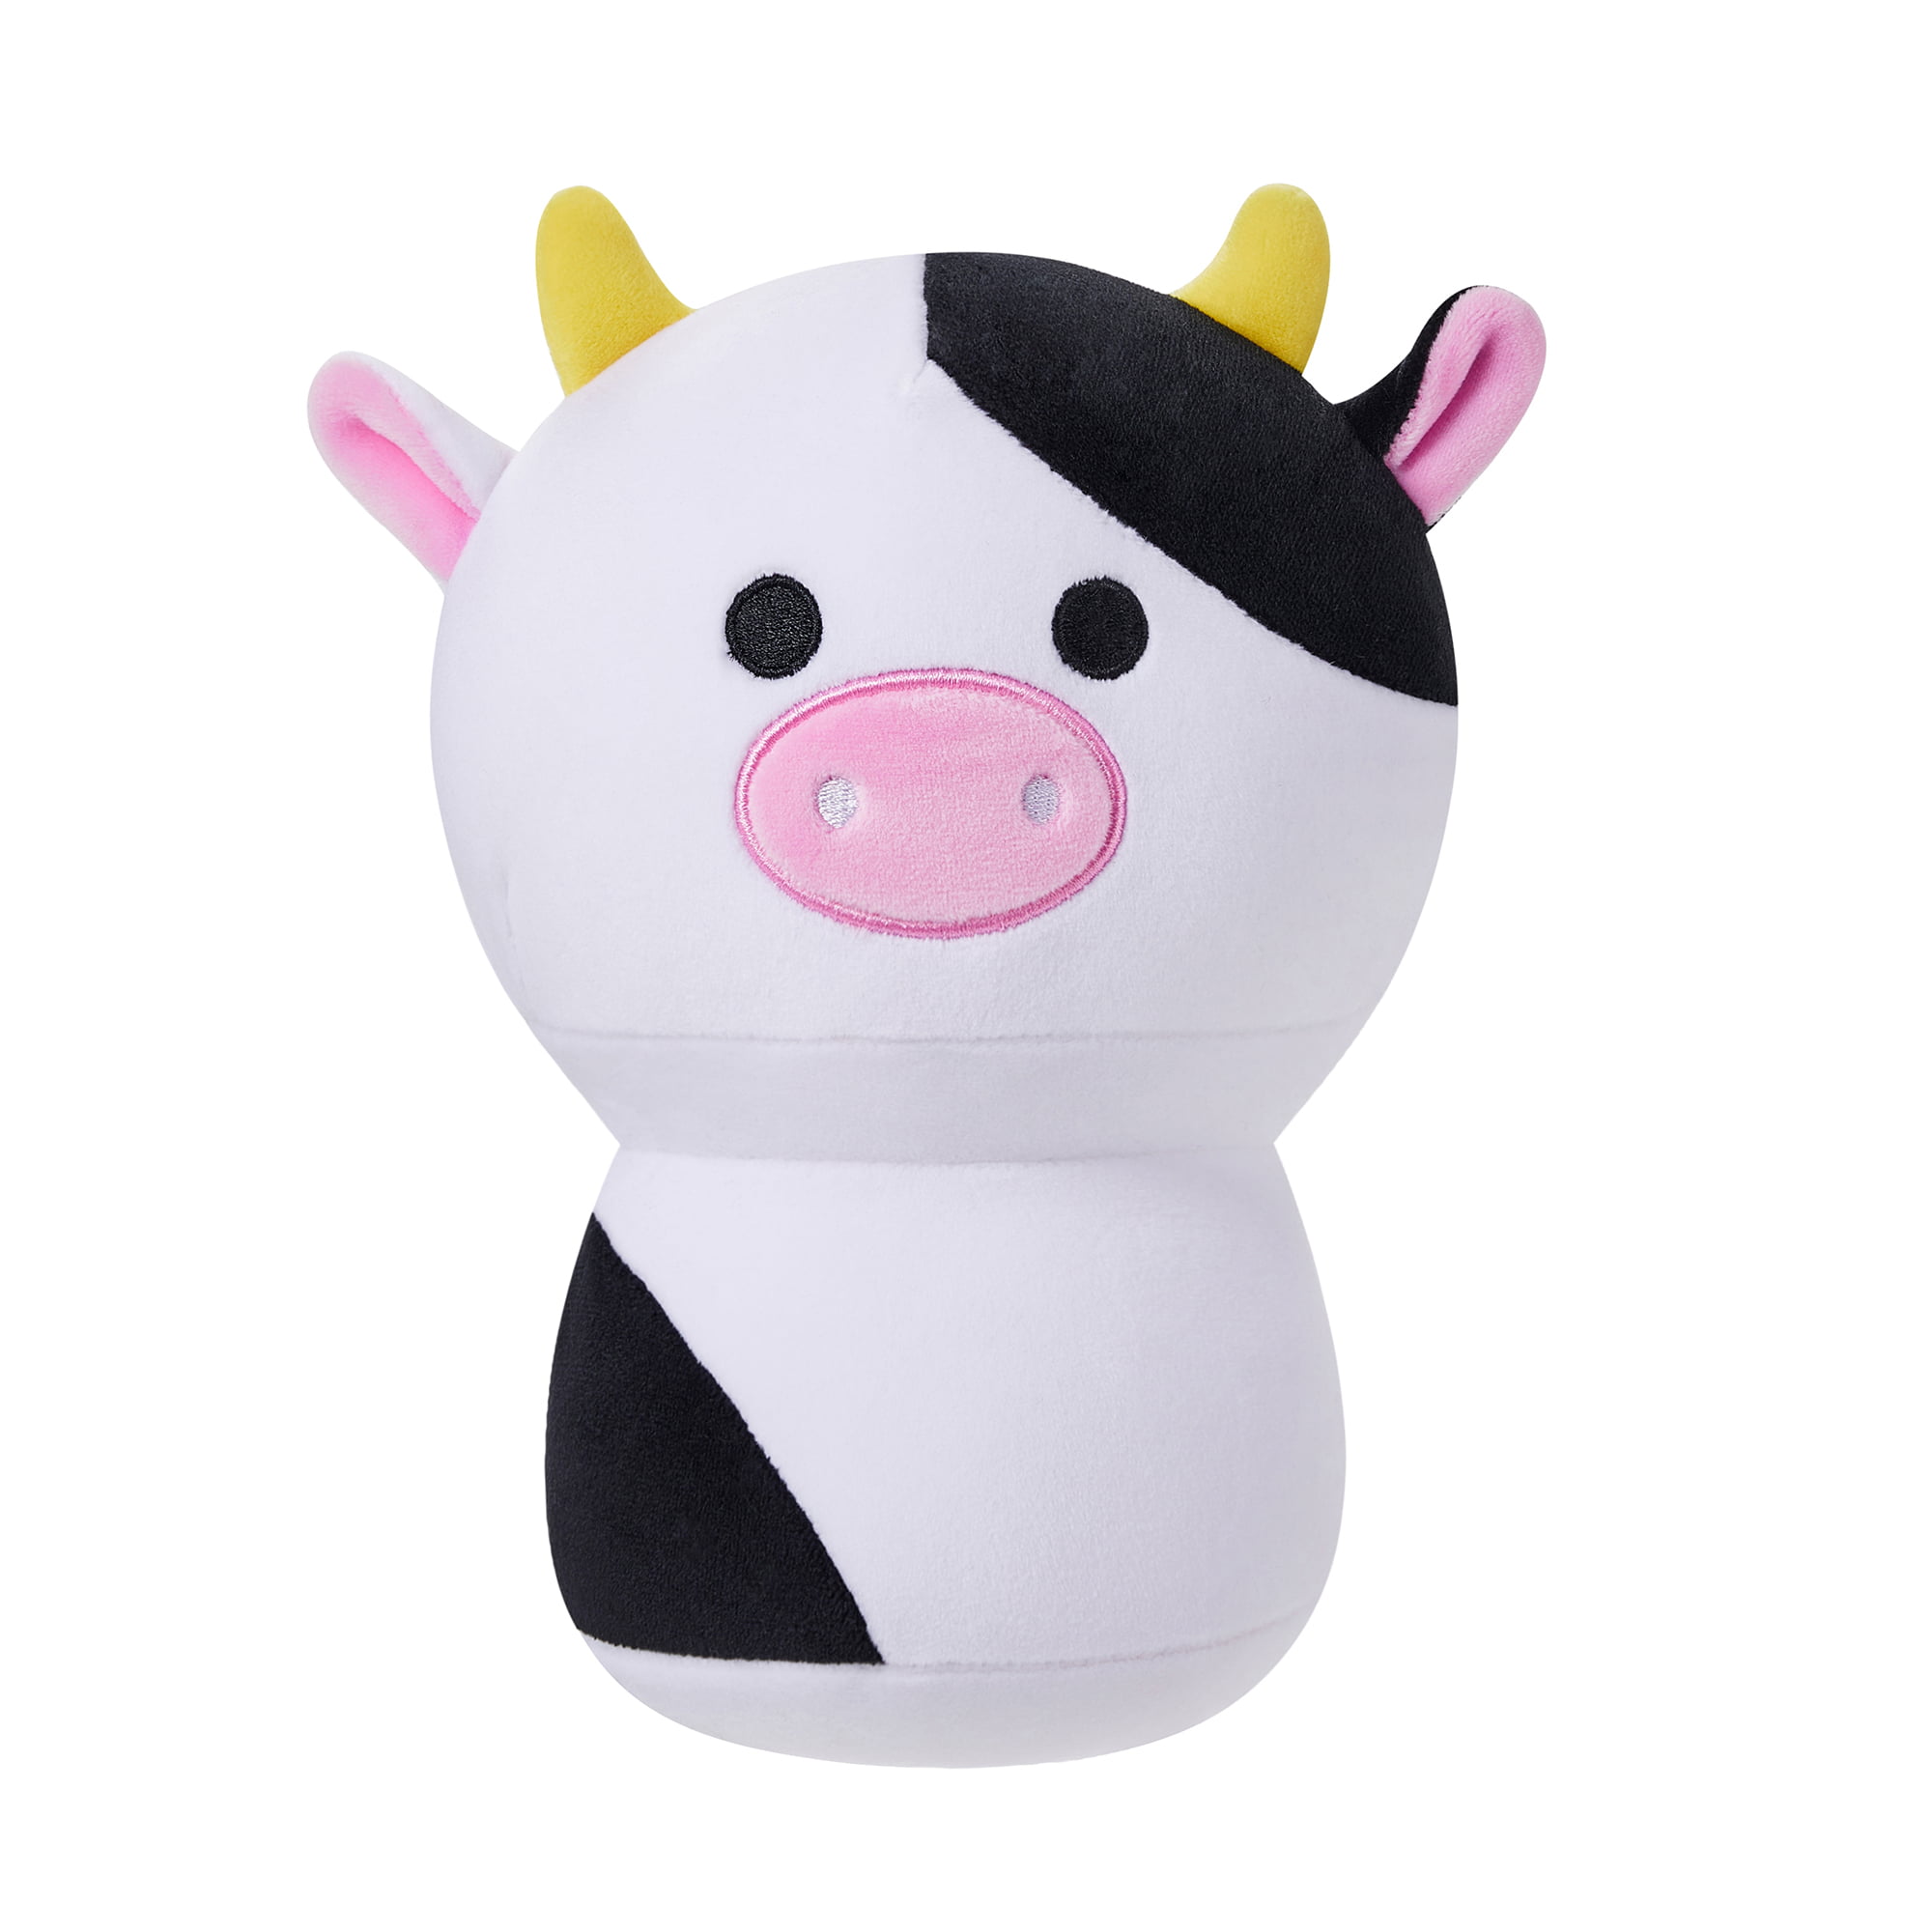  Avocatt Pink Cow Plush Toy - 10 Inches Plushie